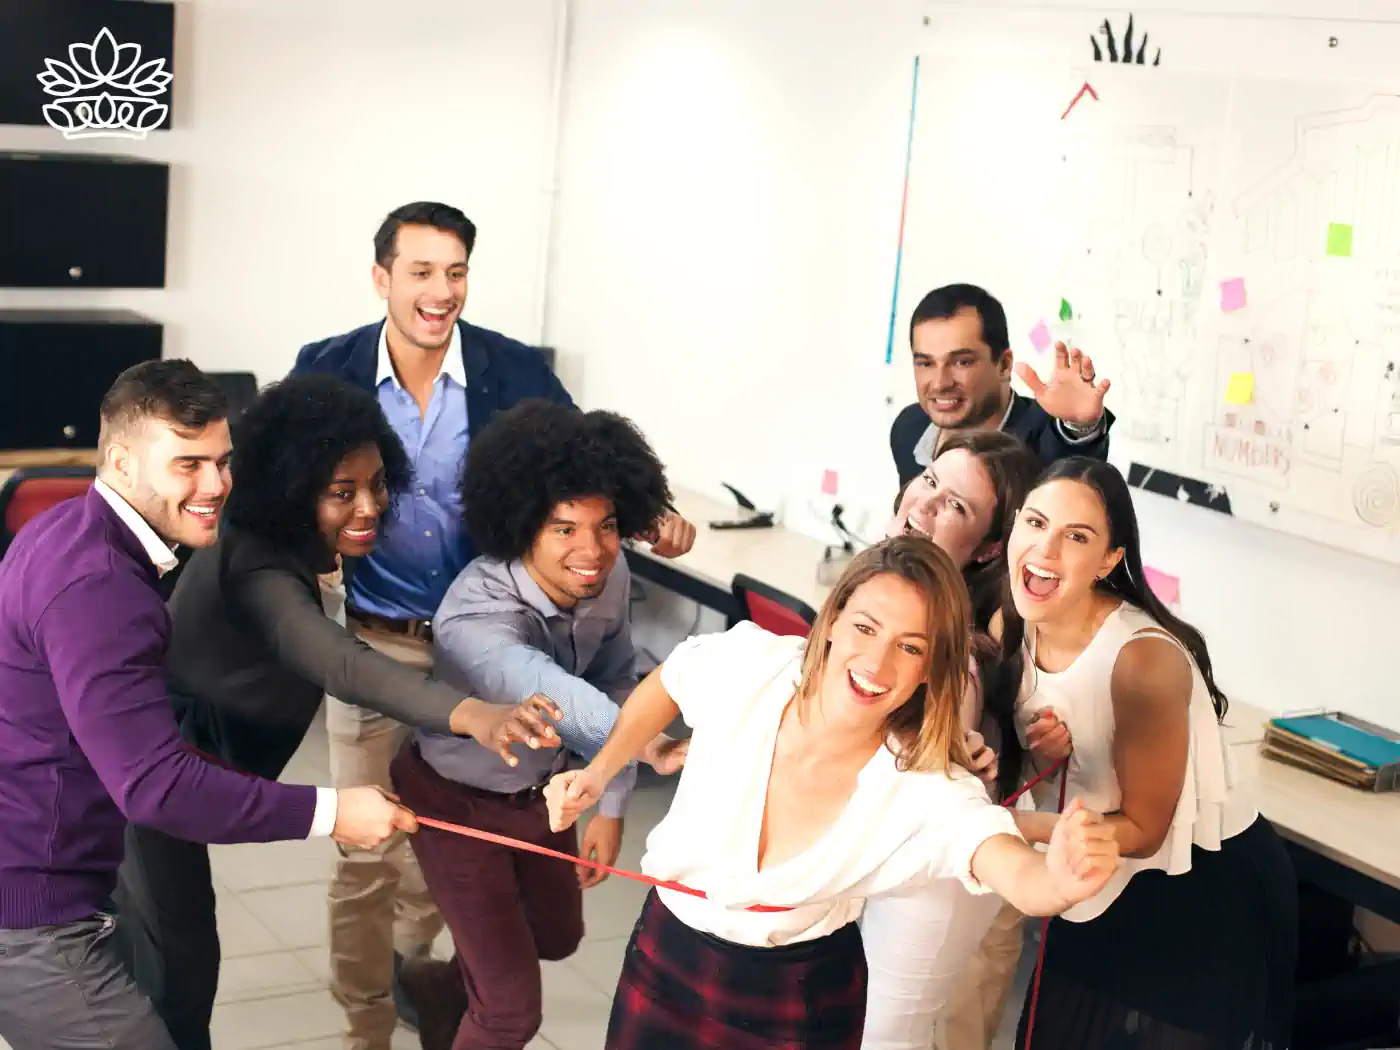 A vibrant and enthusiastic team of eight diverse office workers playfully engaging in a tug of war game, displaying teamwork and joy in a creative workplace setting. Fabulous Flowers and Gifts. Team Gifts. Delivered with Heart.